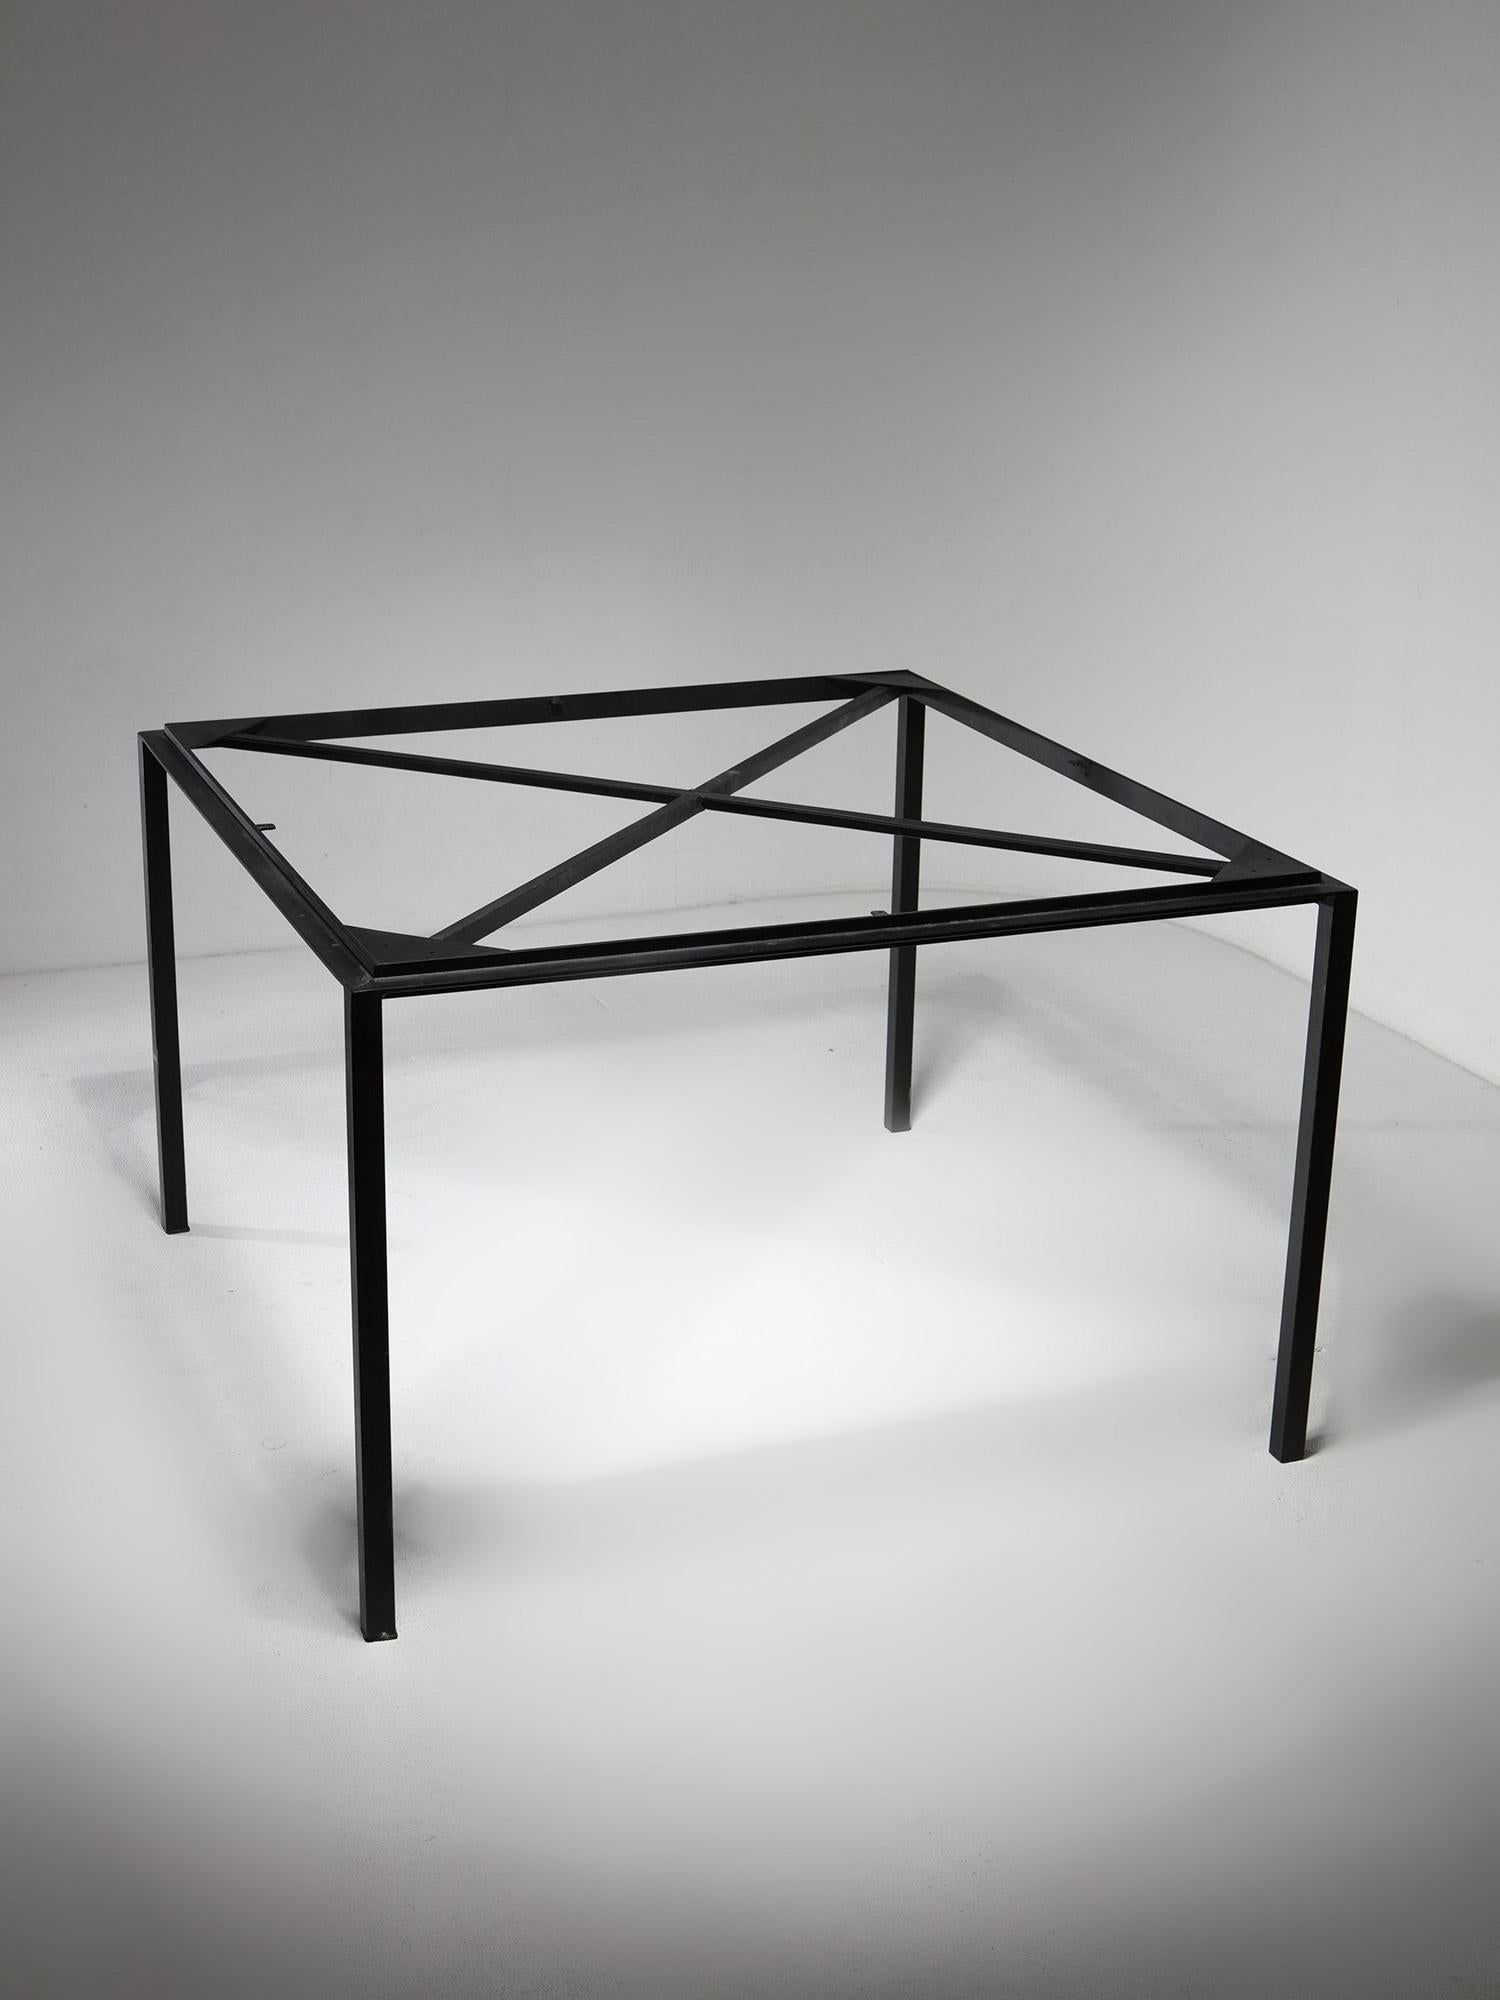 Wood Squared Dining Table by Paolo Tilche for Arform, Italy, 1950s For Sale 1